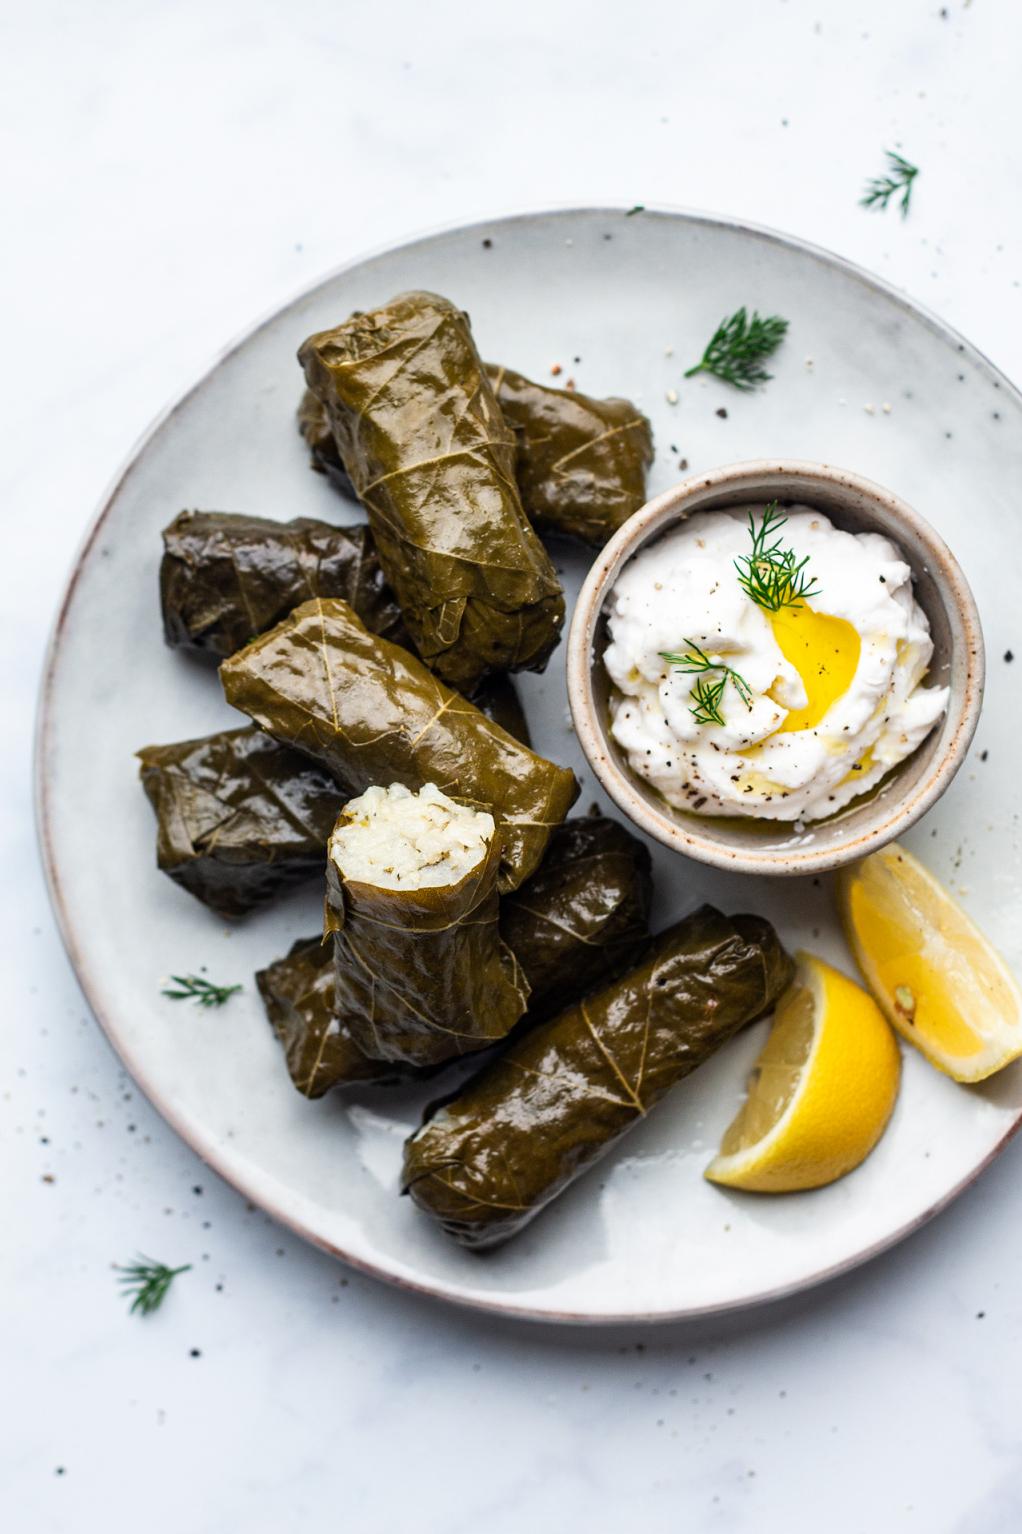  These Vegan Dolmades are the perfect appetizer for any occasions!